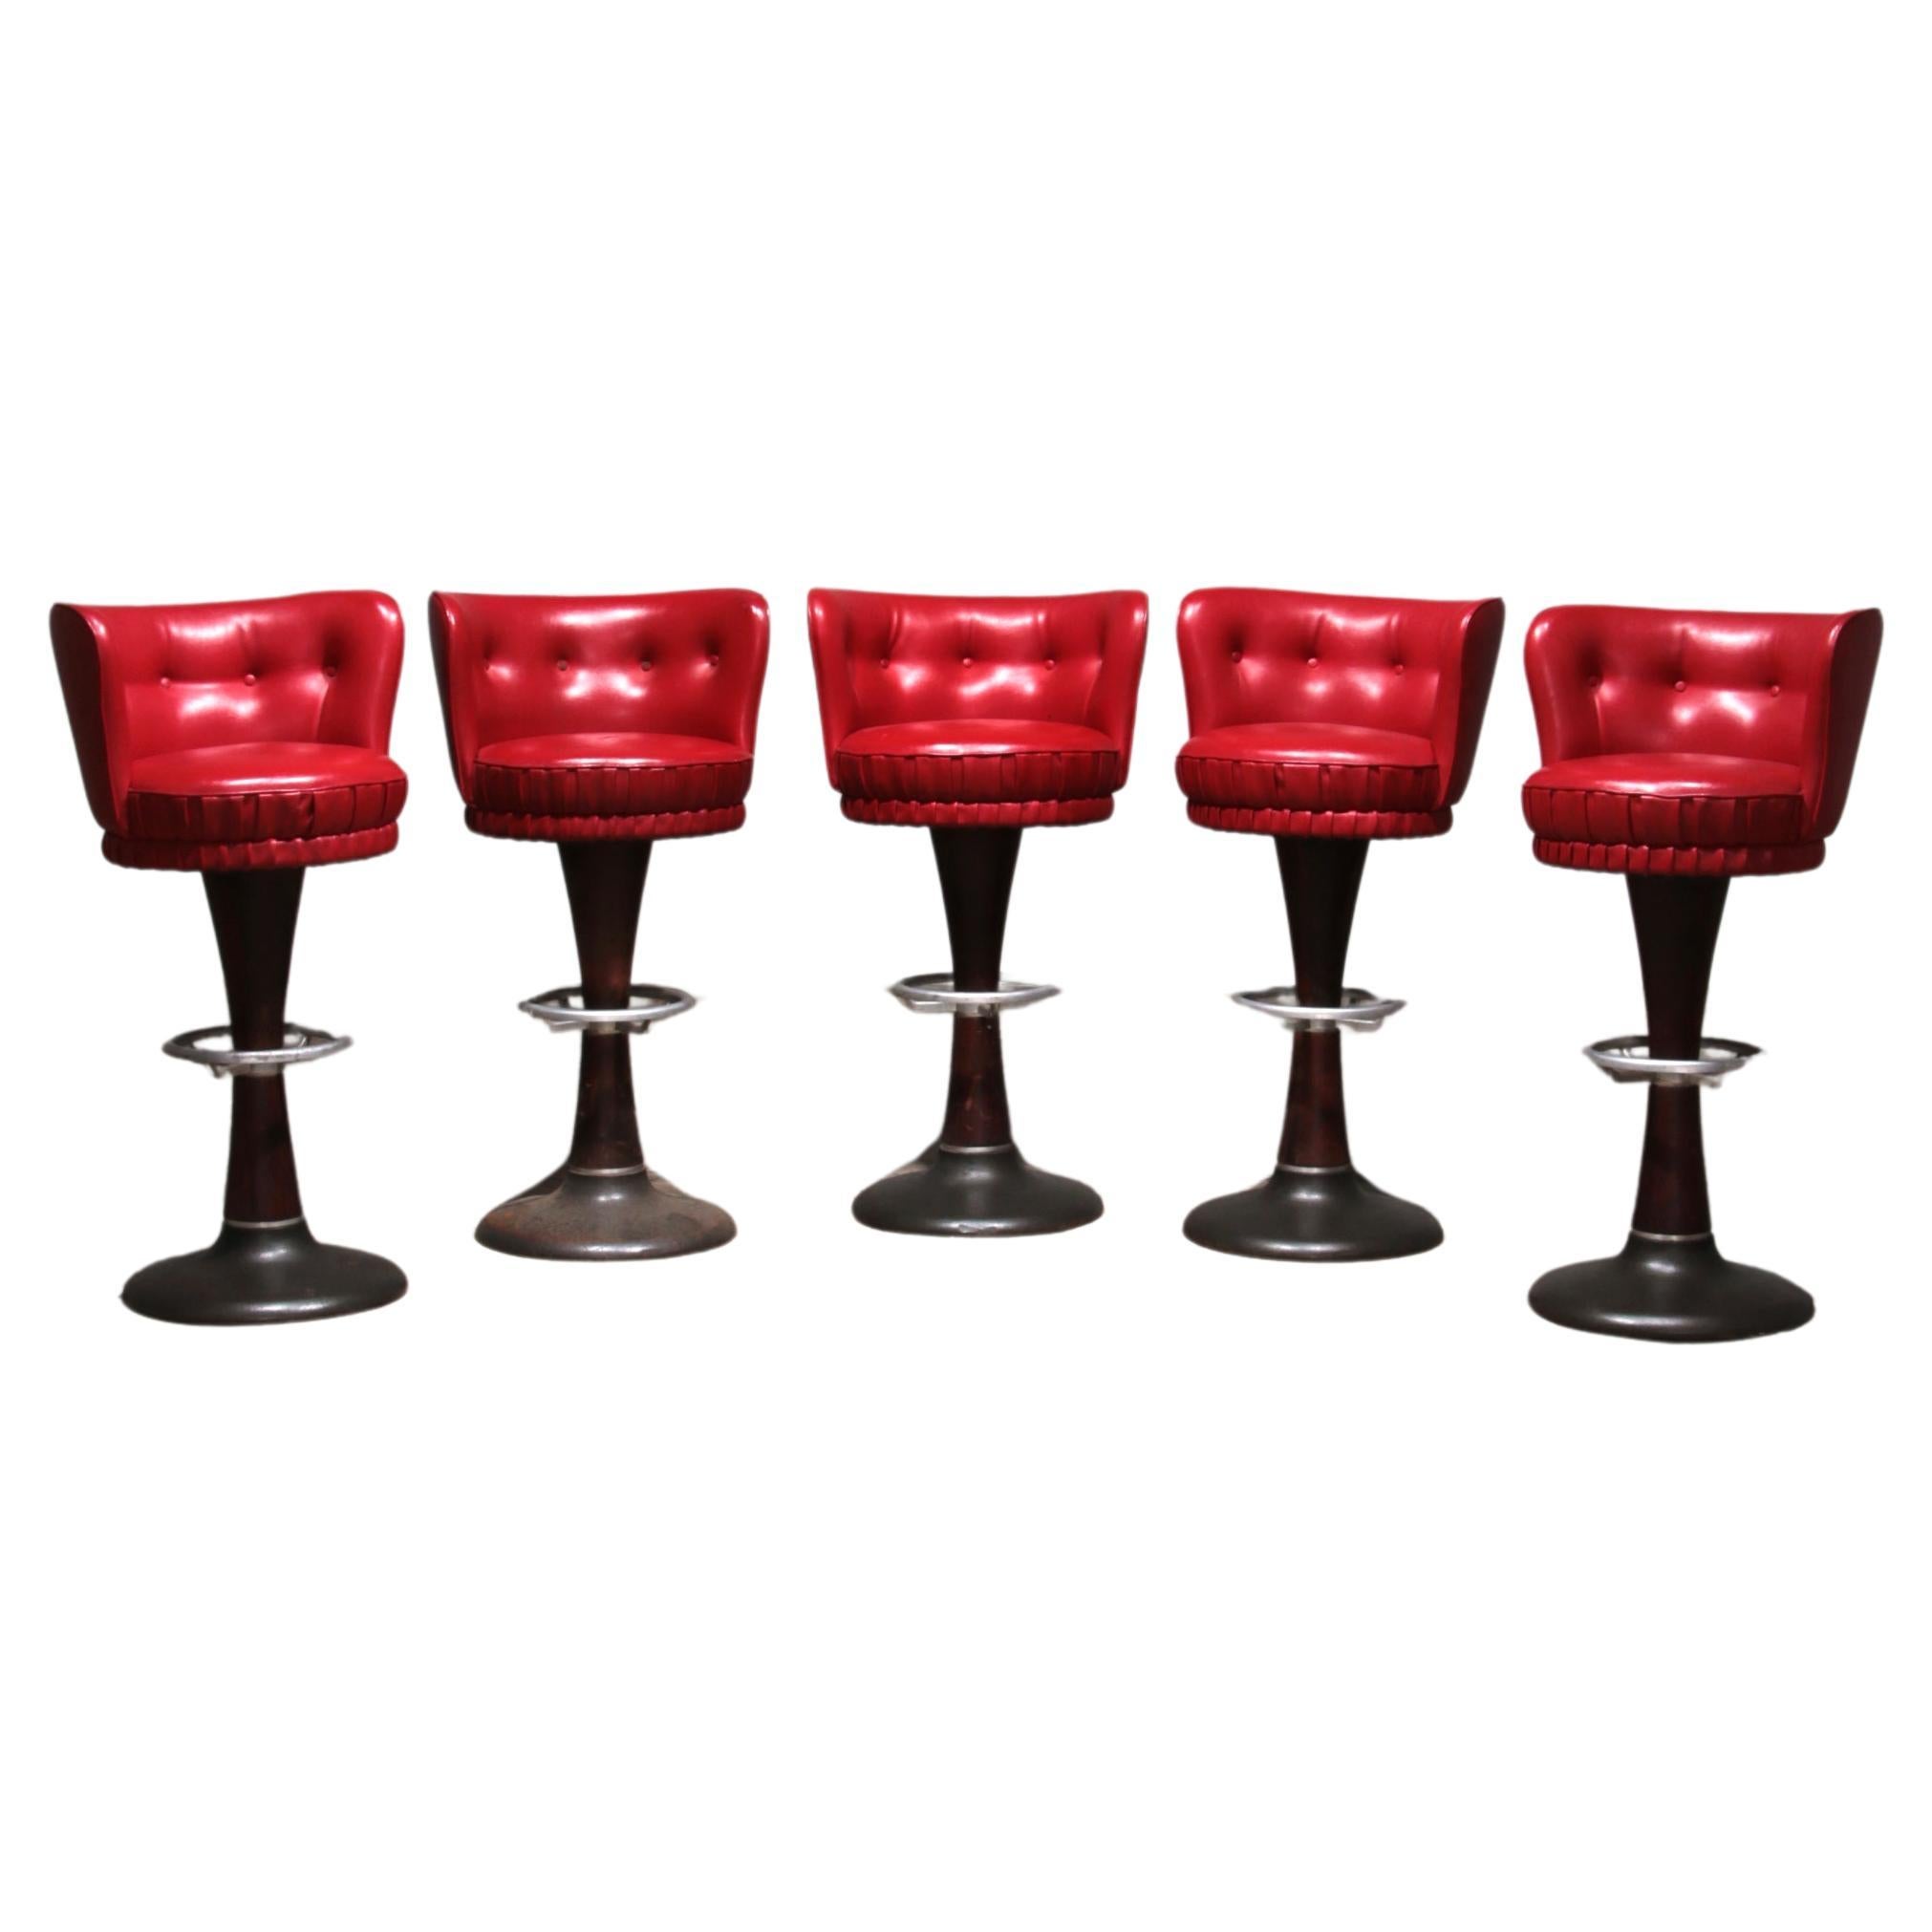 Captain's Bar Chair with Red Leather Upholstery and Steel Base set off 5